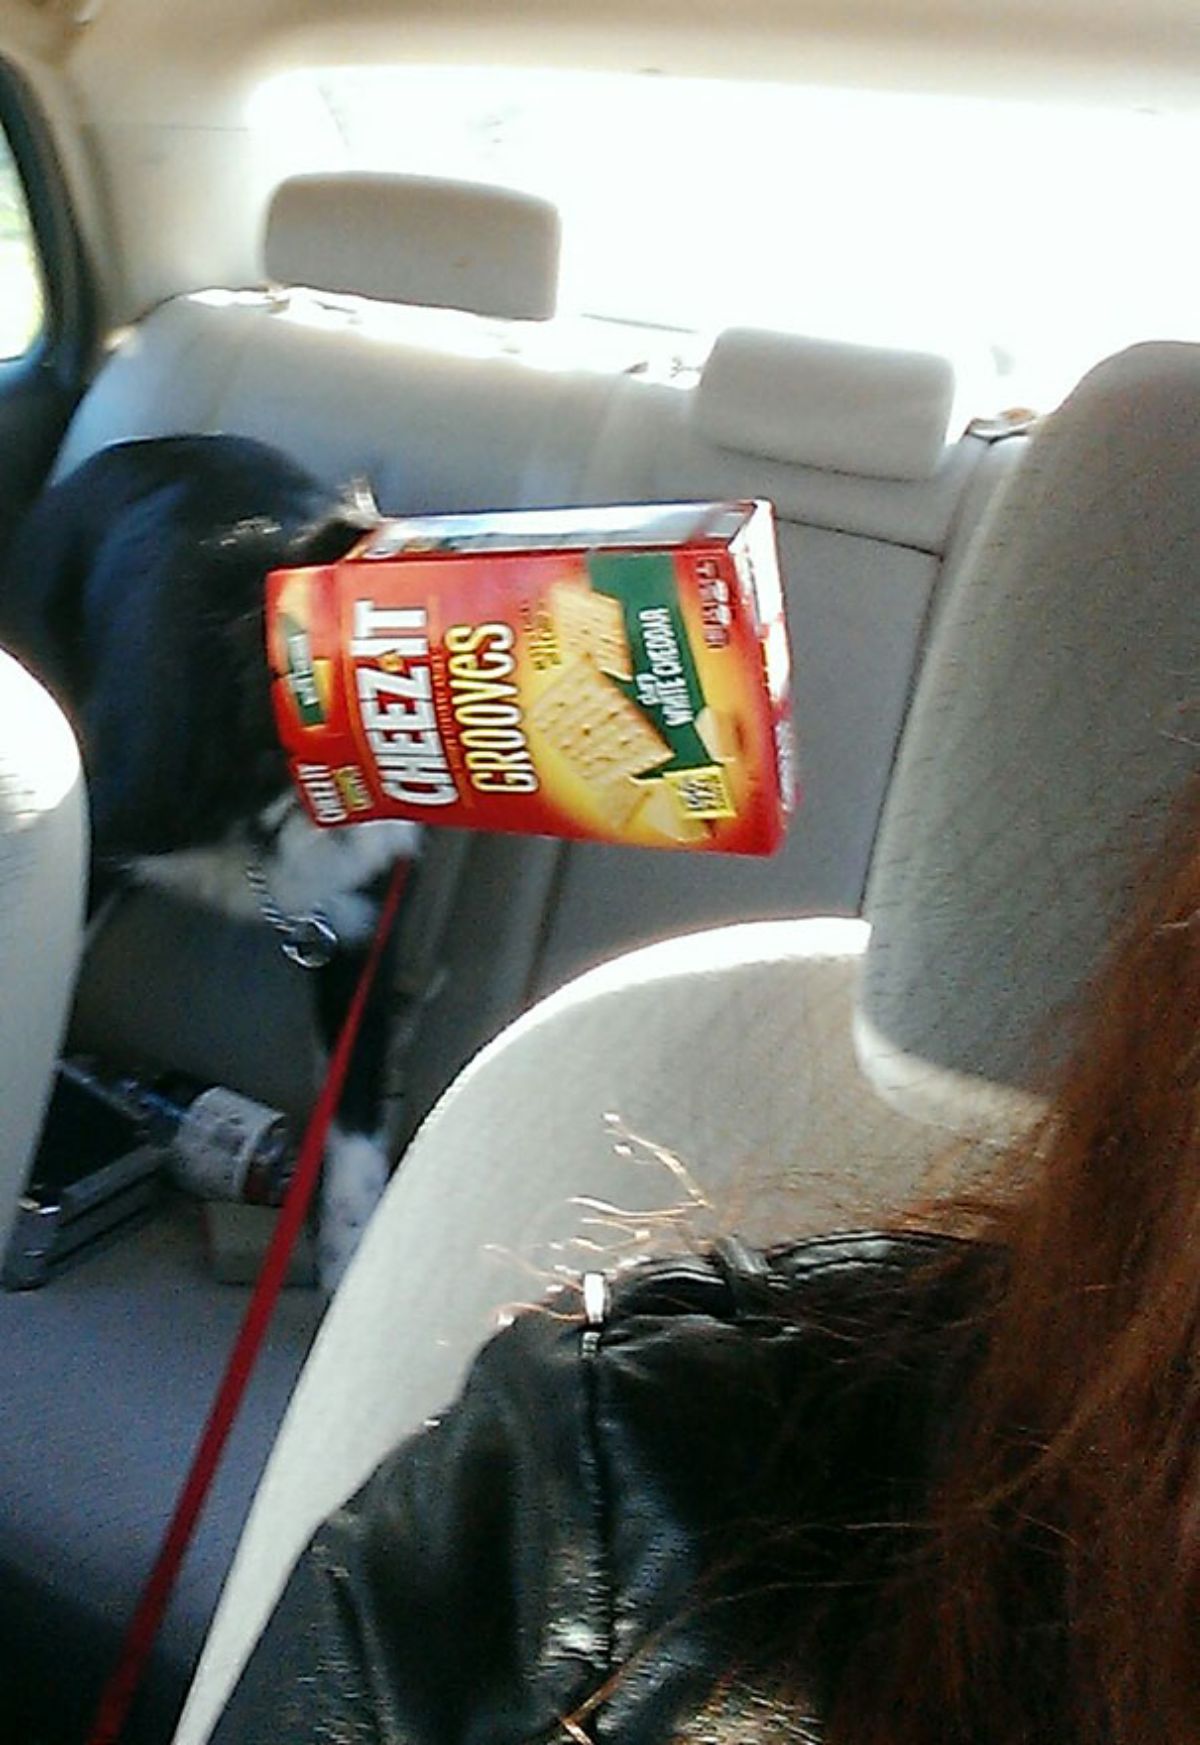 black and white dog in a vehicle's back seat with the face stuck inside a red cheez it box